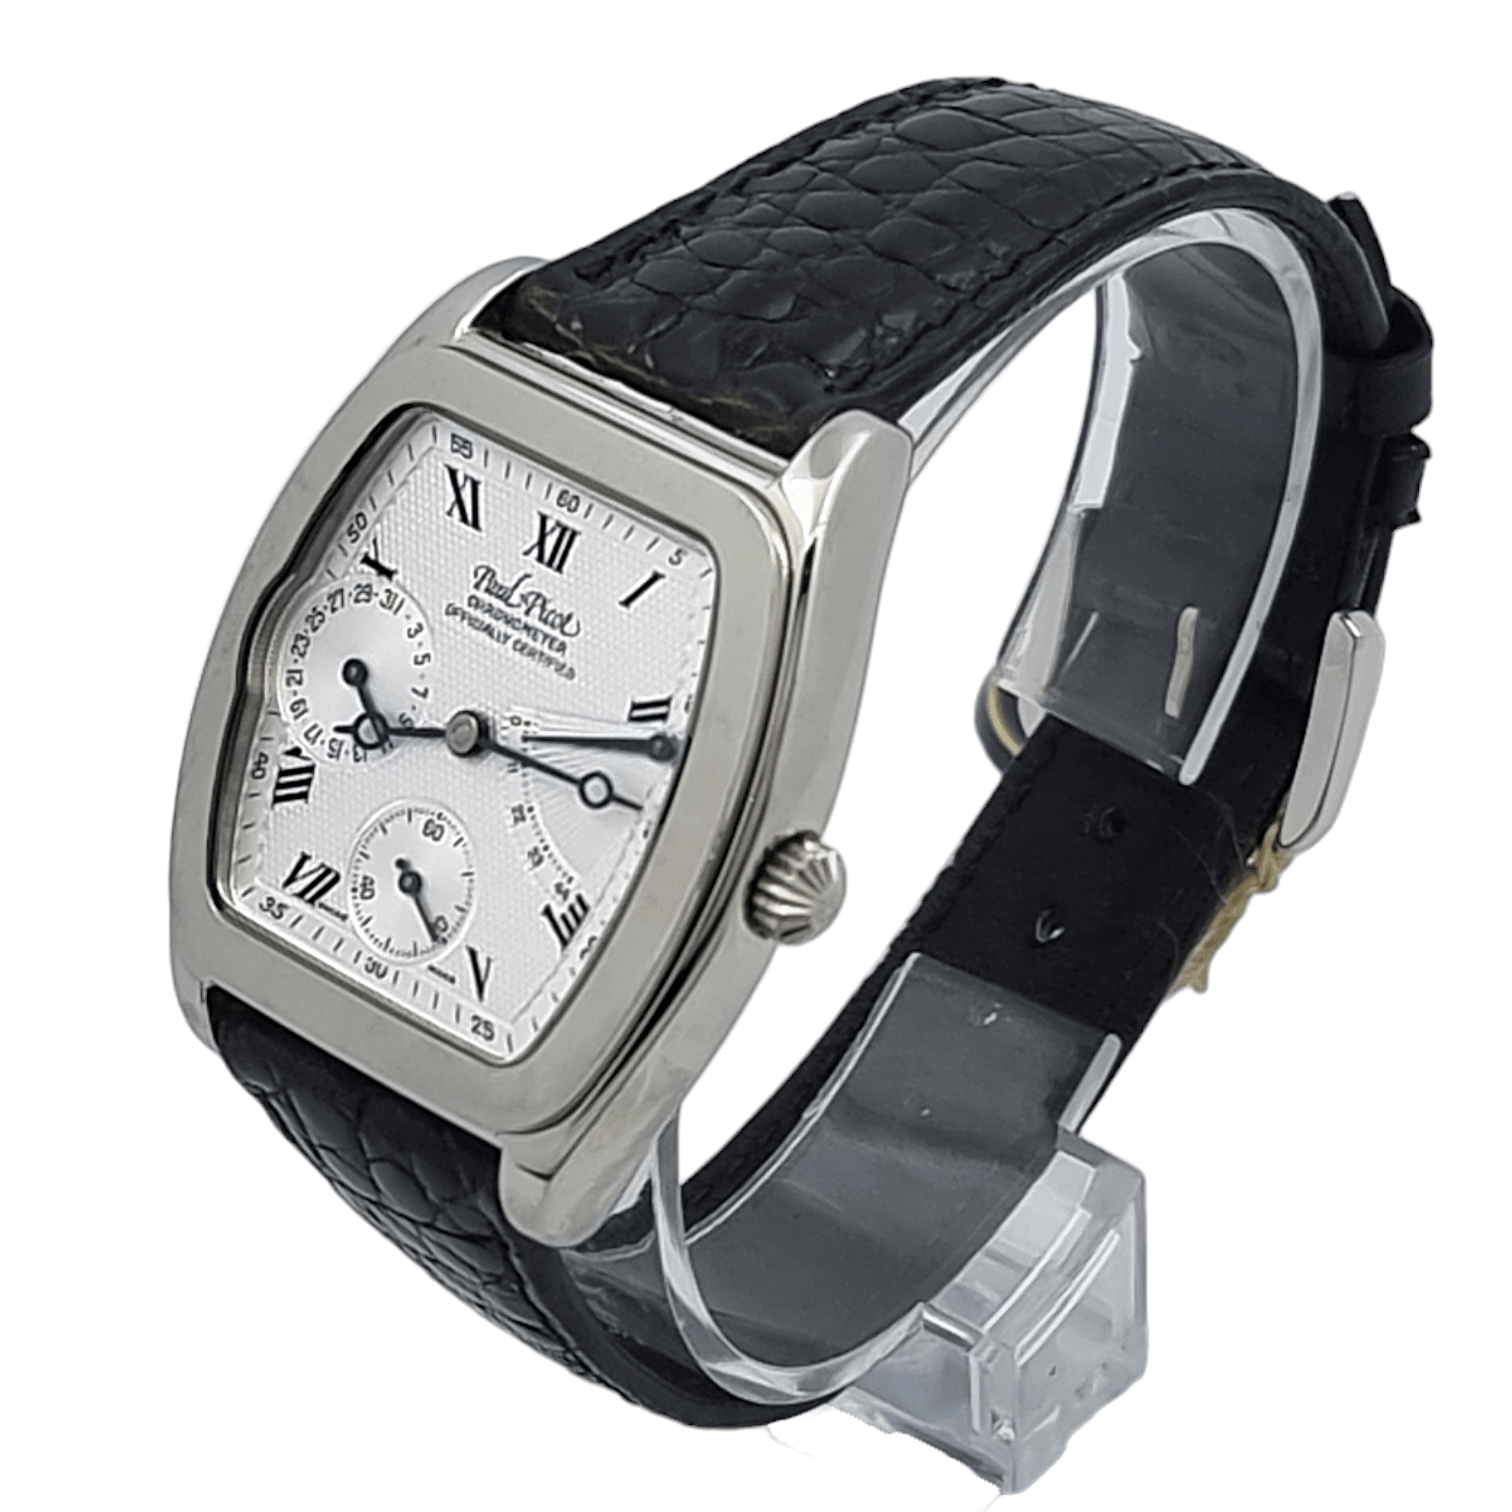 Paul Picot Firshire Chronometer Reserve de Marche Ref. 4034 - ON5577 - LuxuryInStock